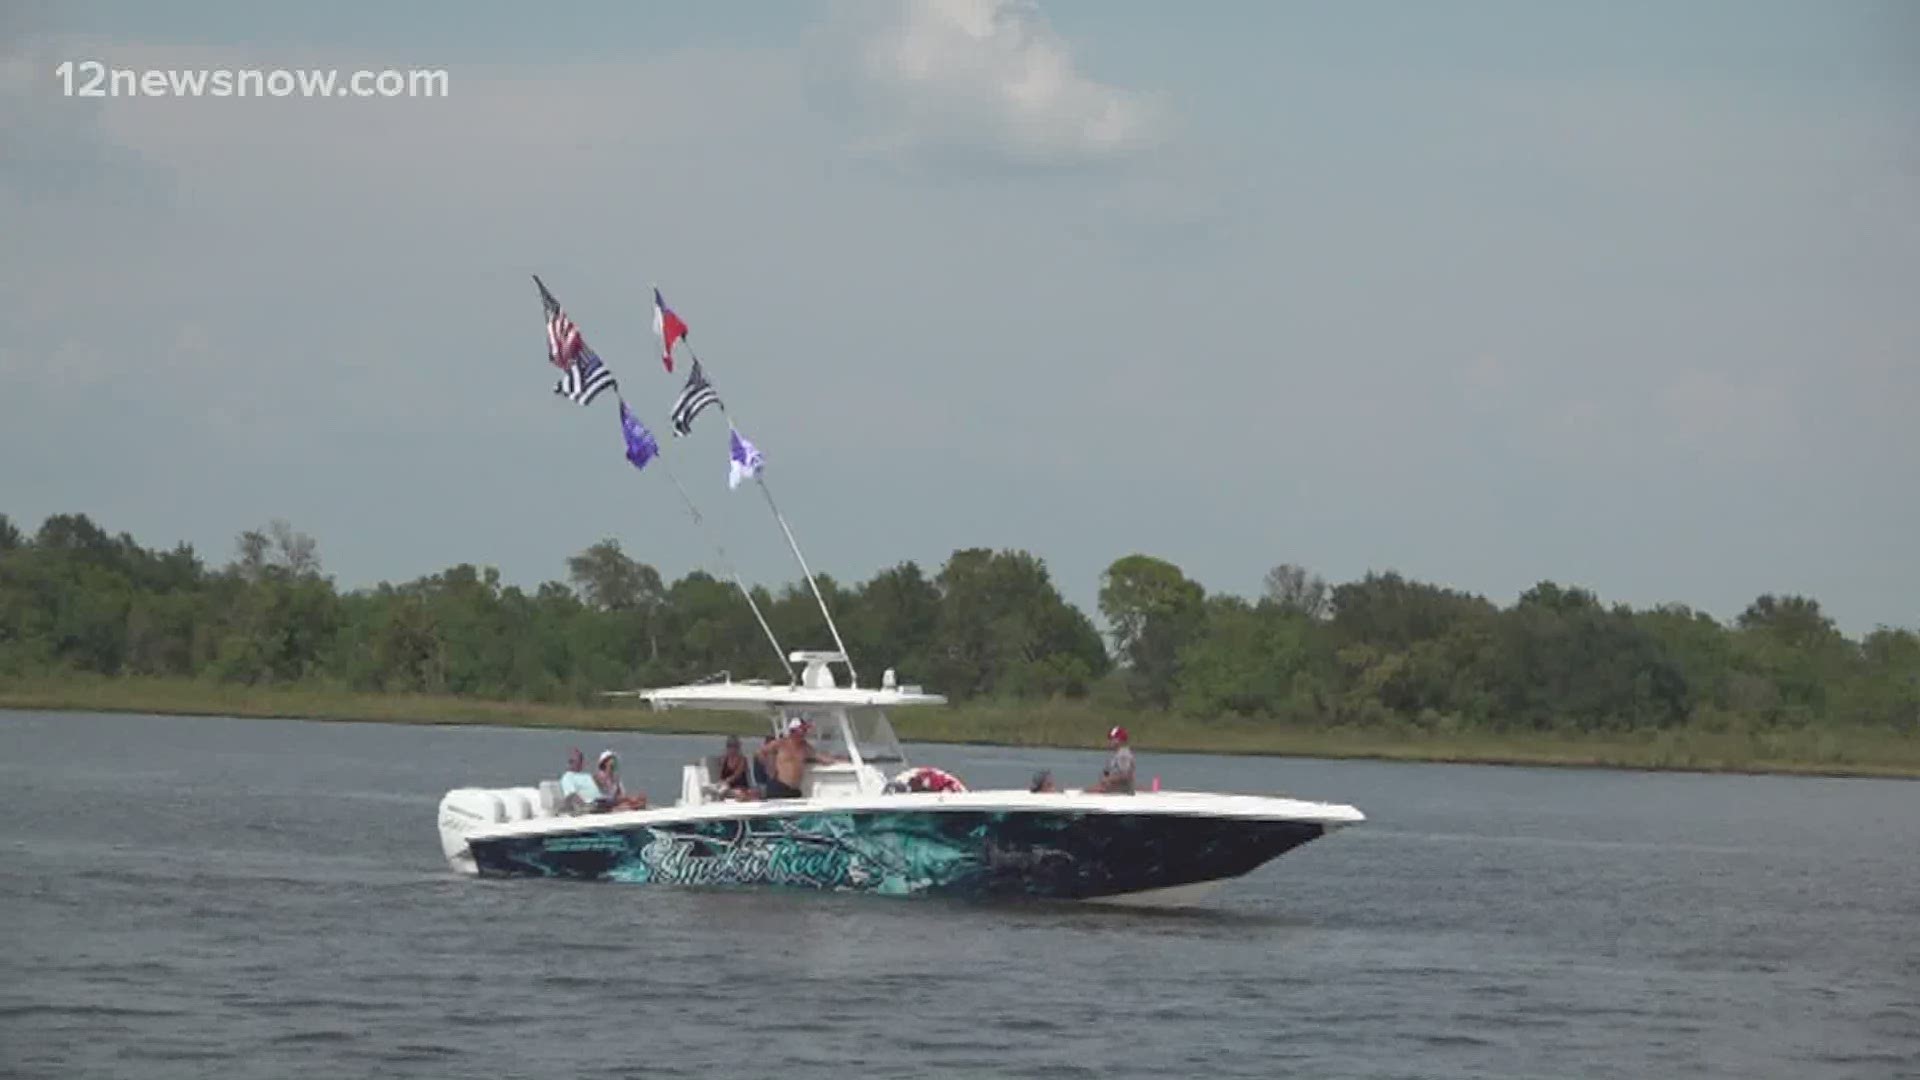 Hundreds of President Trump's supporters hit the water Saturday to honor him. Around 250 boats were on Neches River for a Labor Day weekend Trump parade.